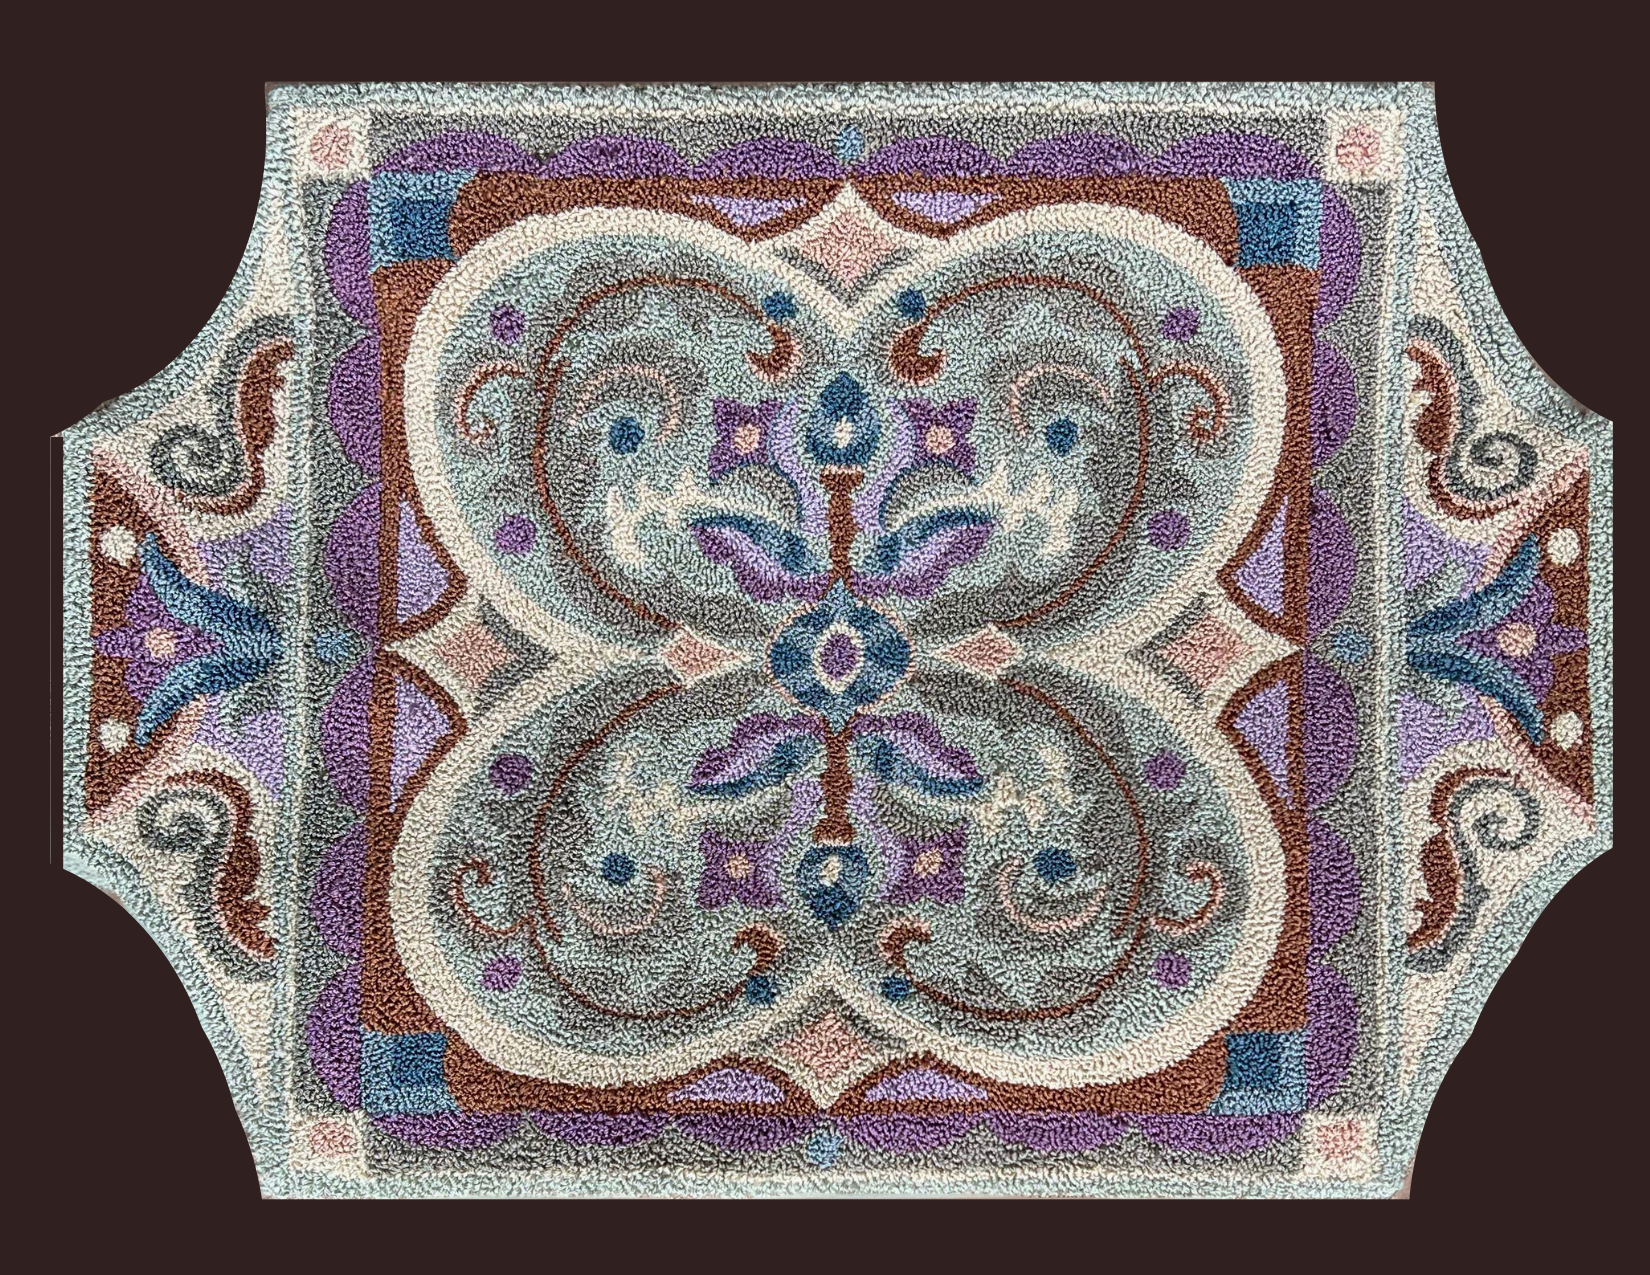 Misty Lavender- Rug Hooking Paper Pattern by Orphaned Wool. This is a beautifully designed intricate design using lavender and soft hue colors to create a stunning designed hooked rug. Copyright 2023 Kelly Kanyok